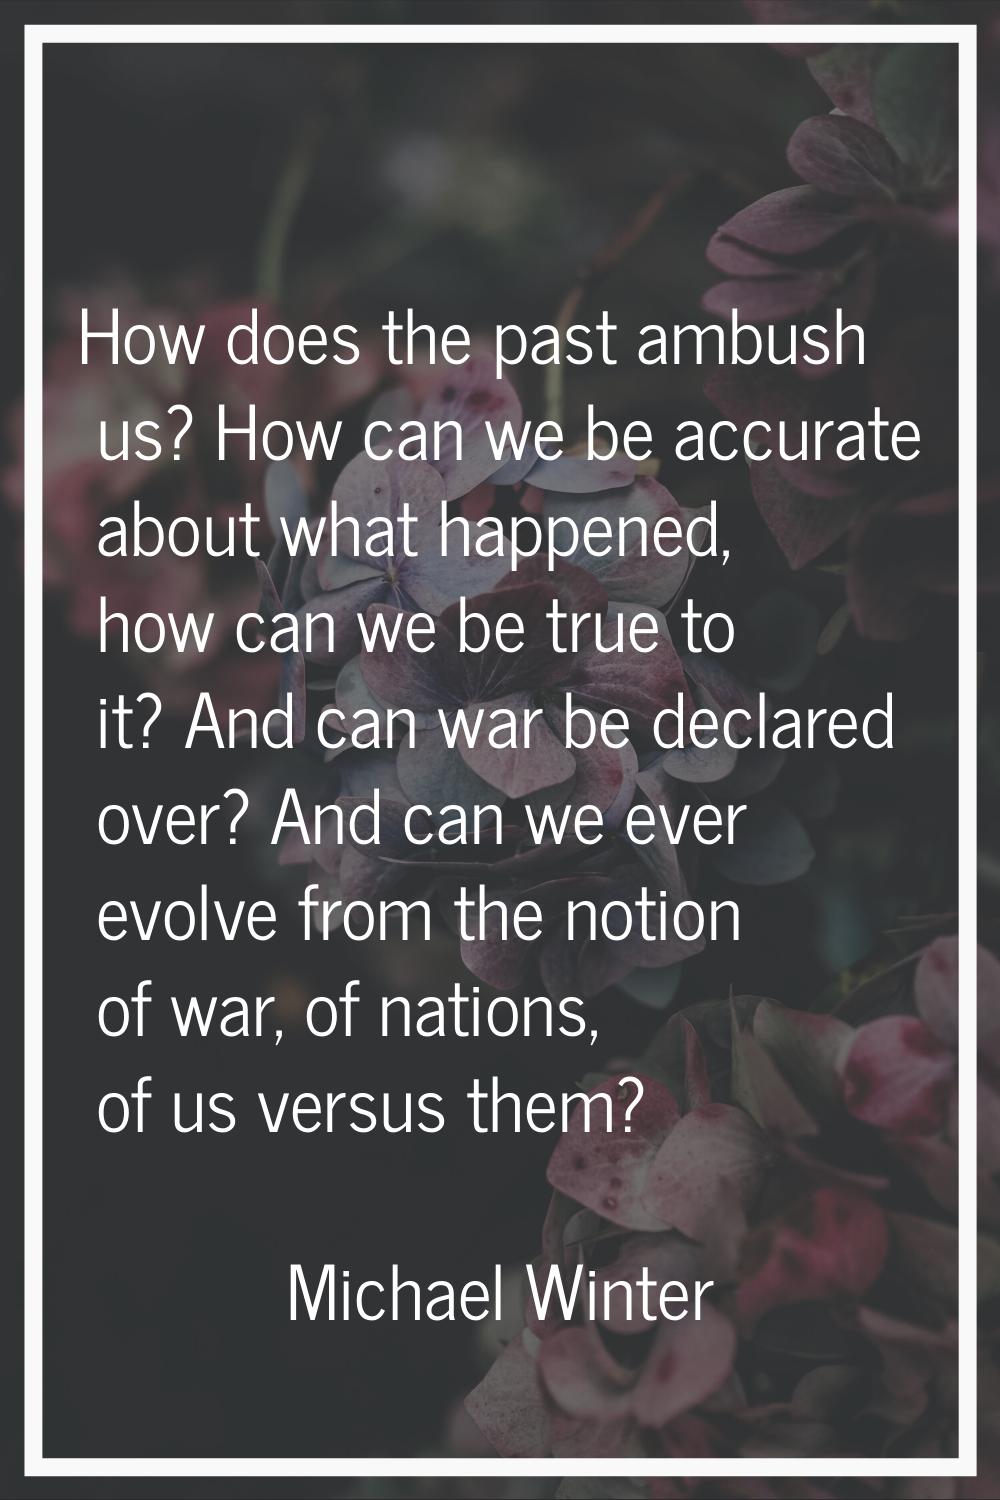 How does the past ambush us? How can we be accurate about what happened, how can we be true to it? 